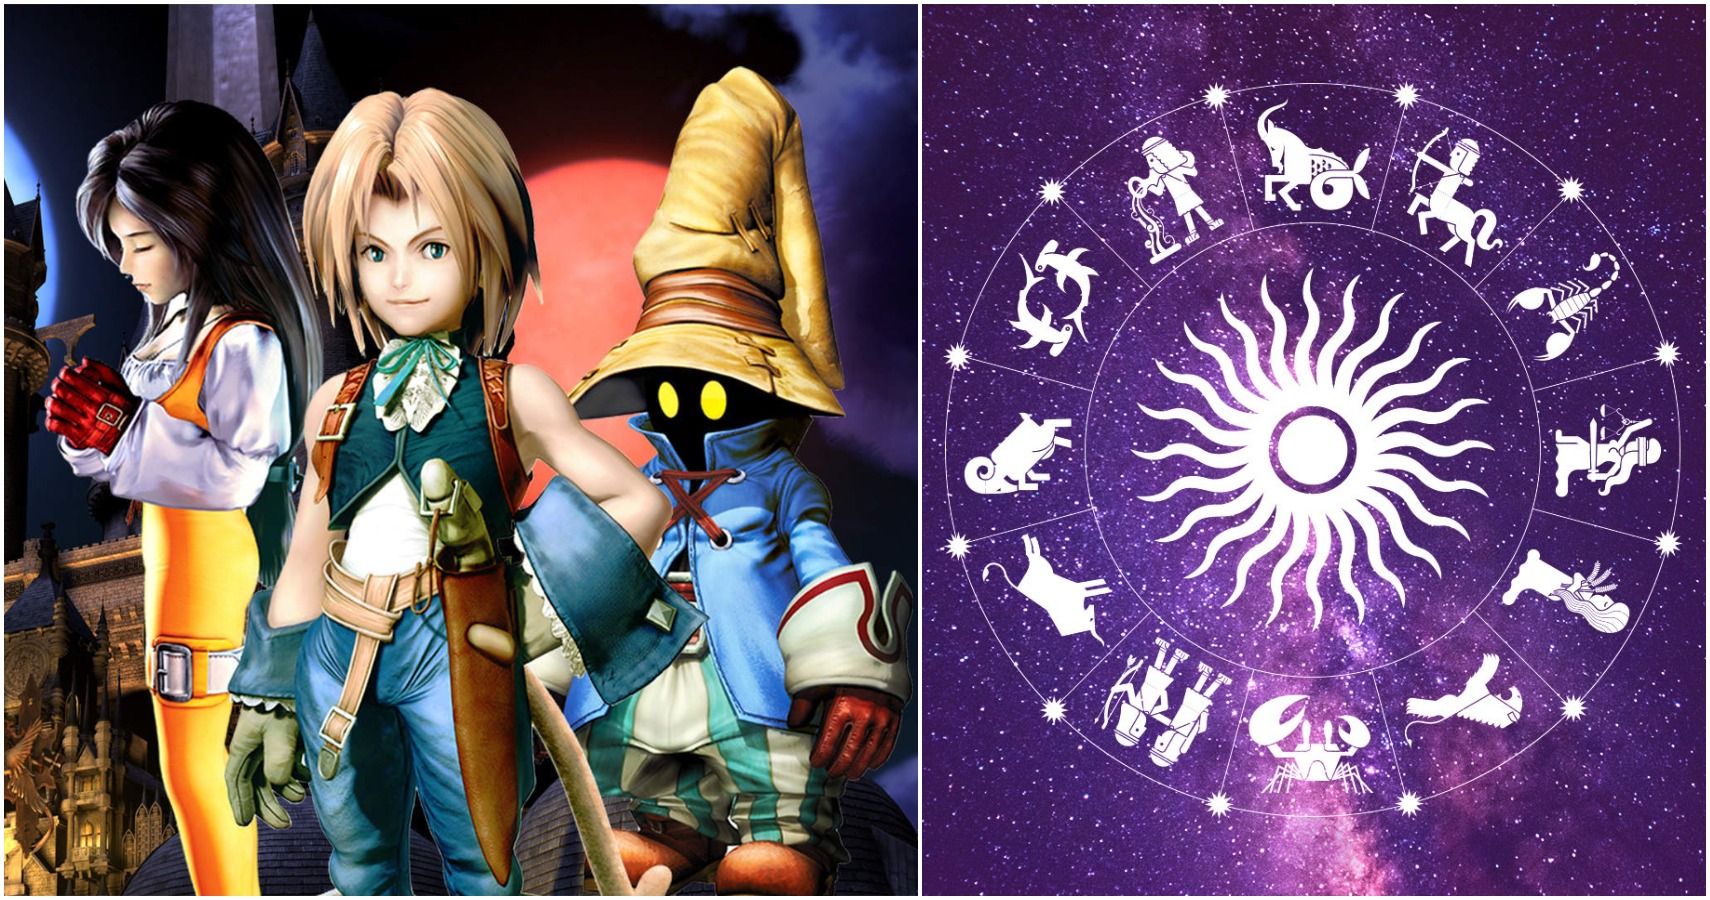 KeyToAeris on X: 6: Final Fantasy IX 9/10 My Second Favorite FF game now.  ITS SOOO GOOD!!!. The story and characters are absolutely phenomenal and  the world is a beautiful display of